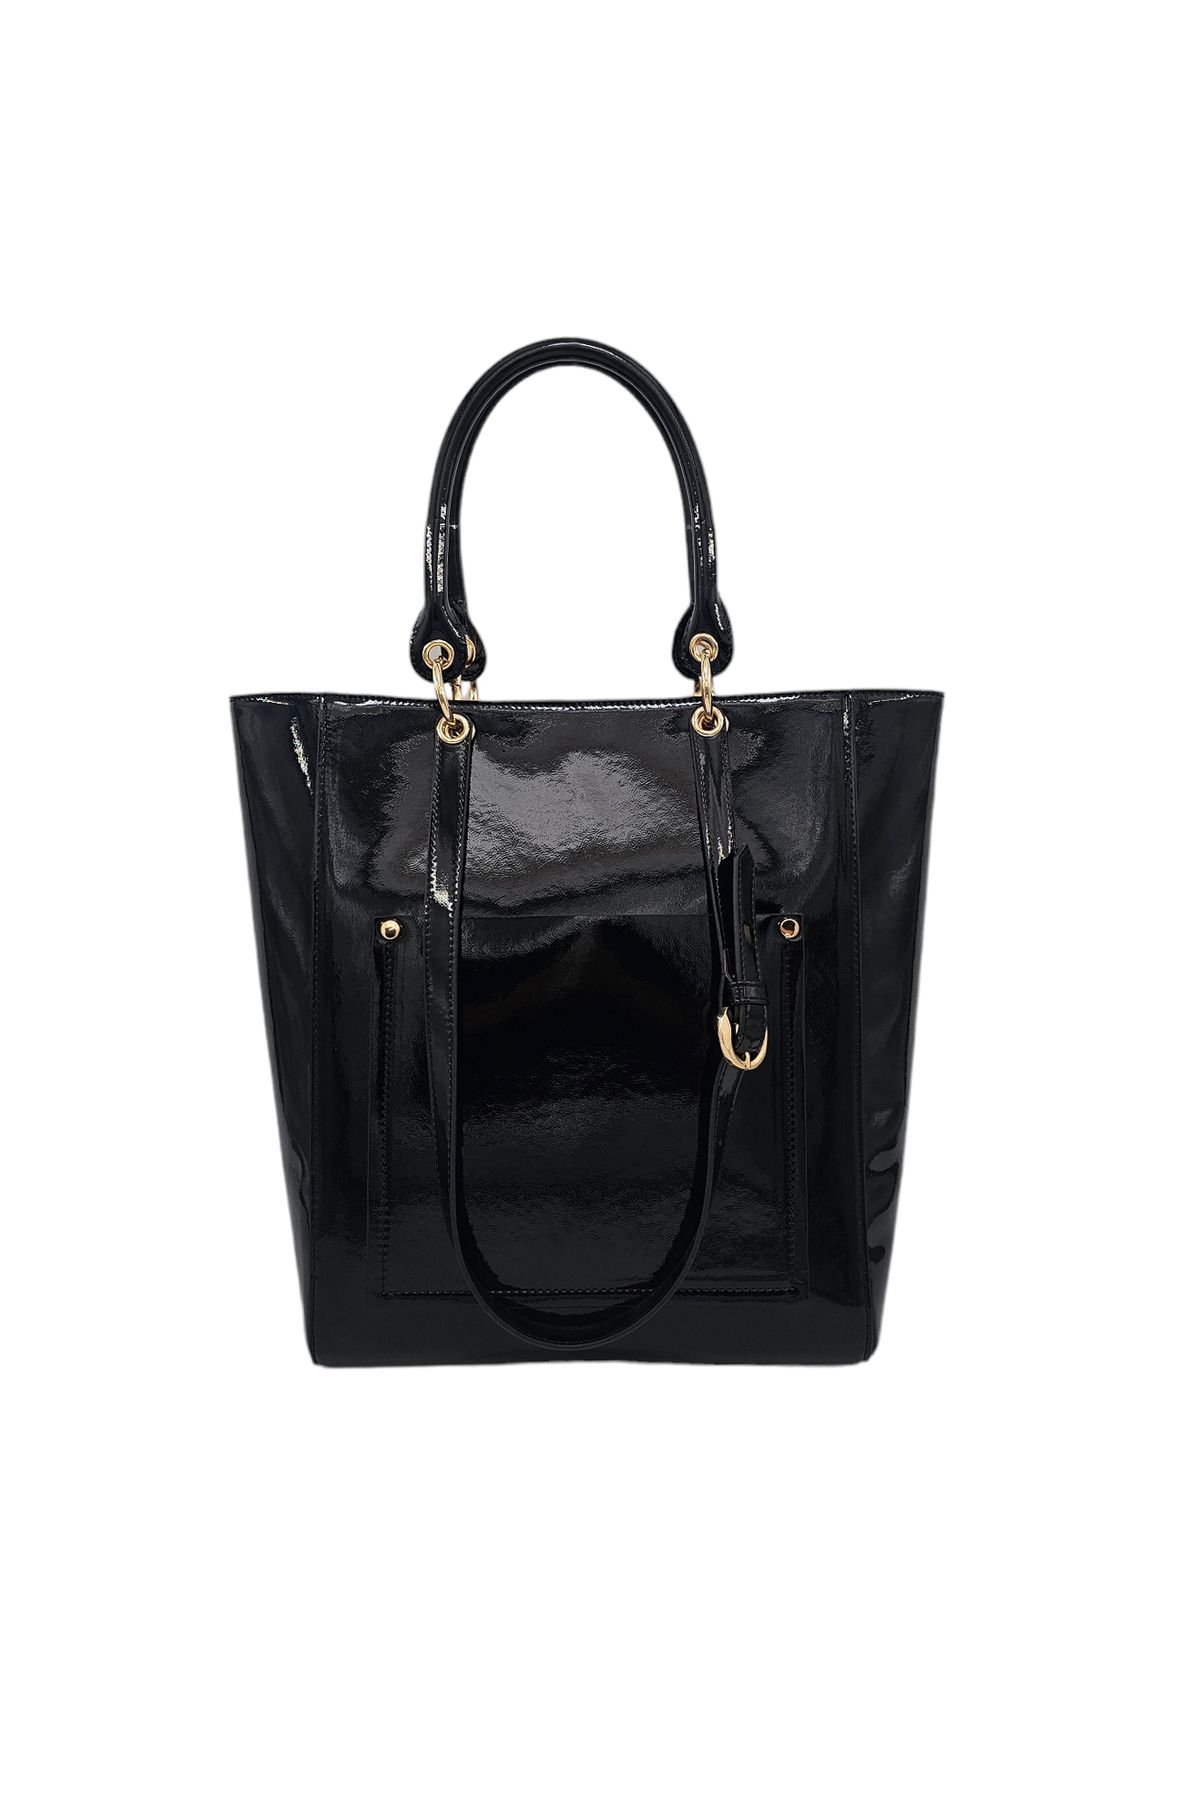 Patent leather handbag GUESS Black in Patent leather - 32636162